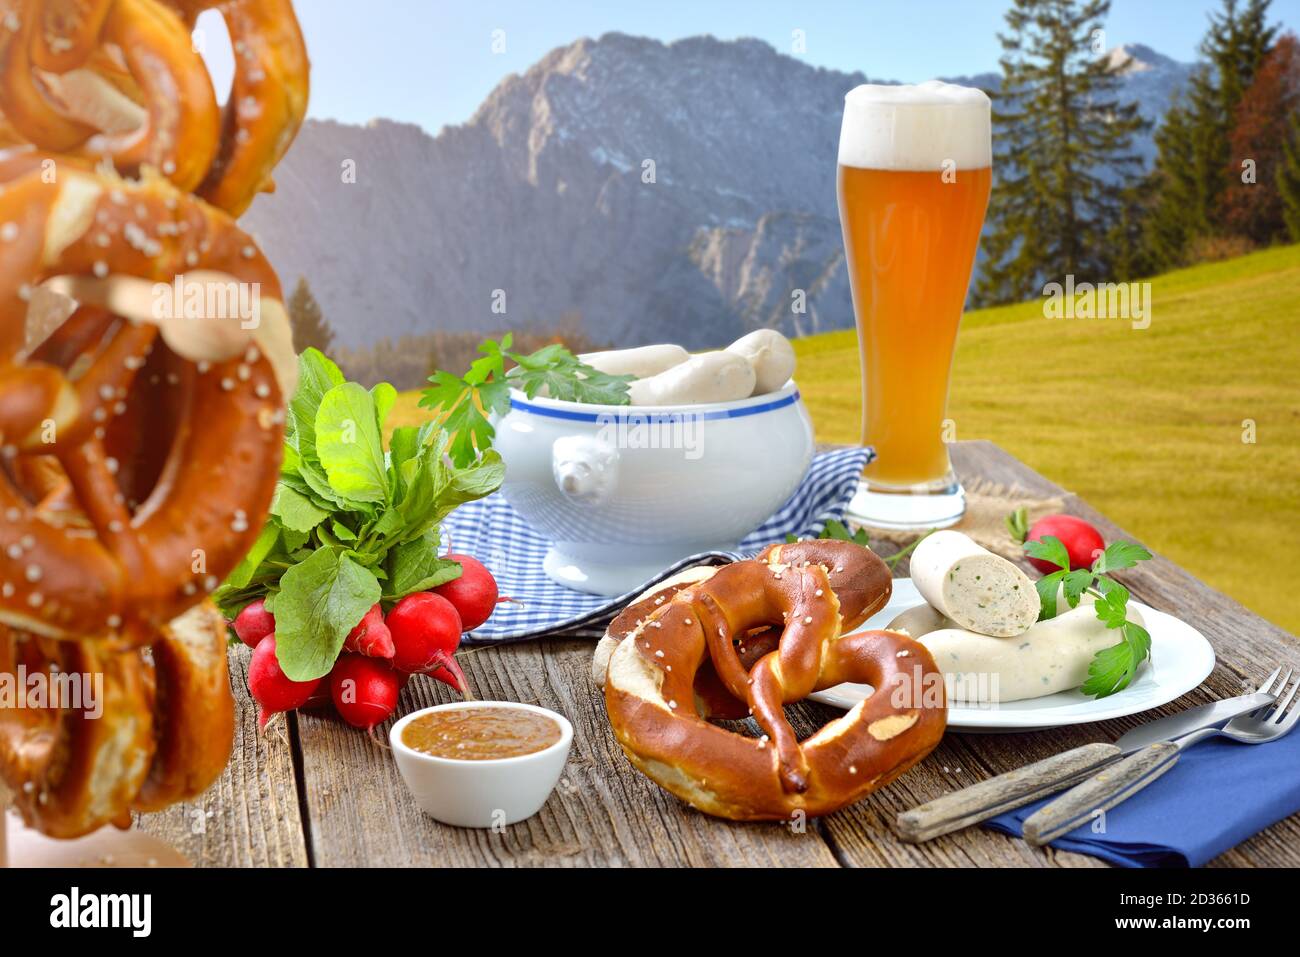 Hearty breakfast with veal sausages, fresh pretzels and a wheat beer outside in the Bavarian mountains near Garmisch-Partenkirchen Stock Photo